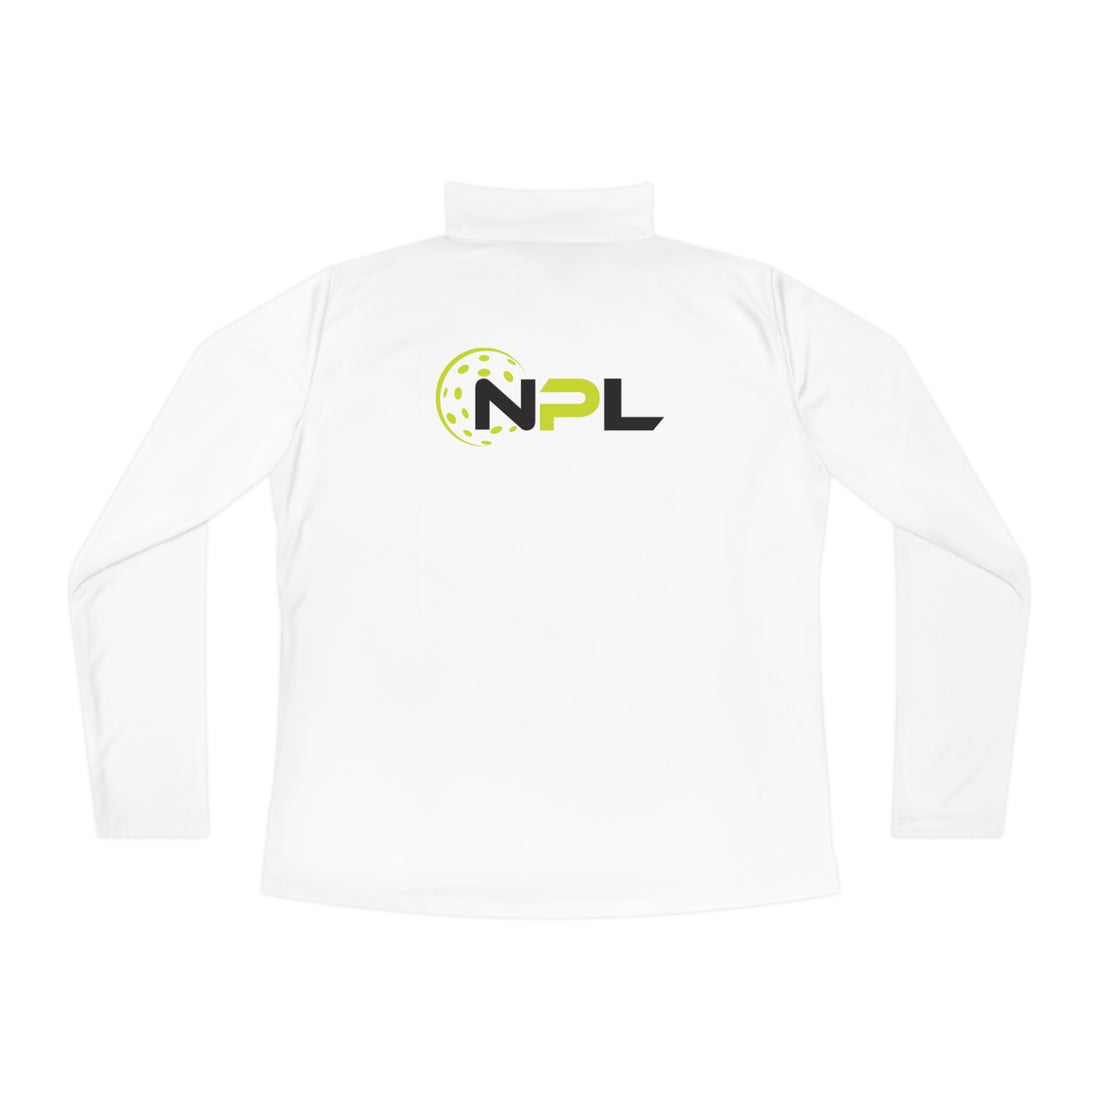 "Ladies Quarter Zip NPL Pullover: Sporty-Chic Style for Any Occasion"